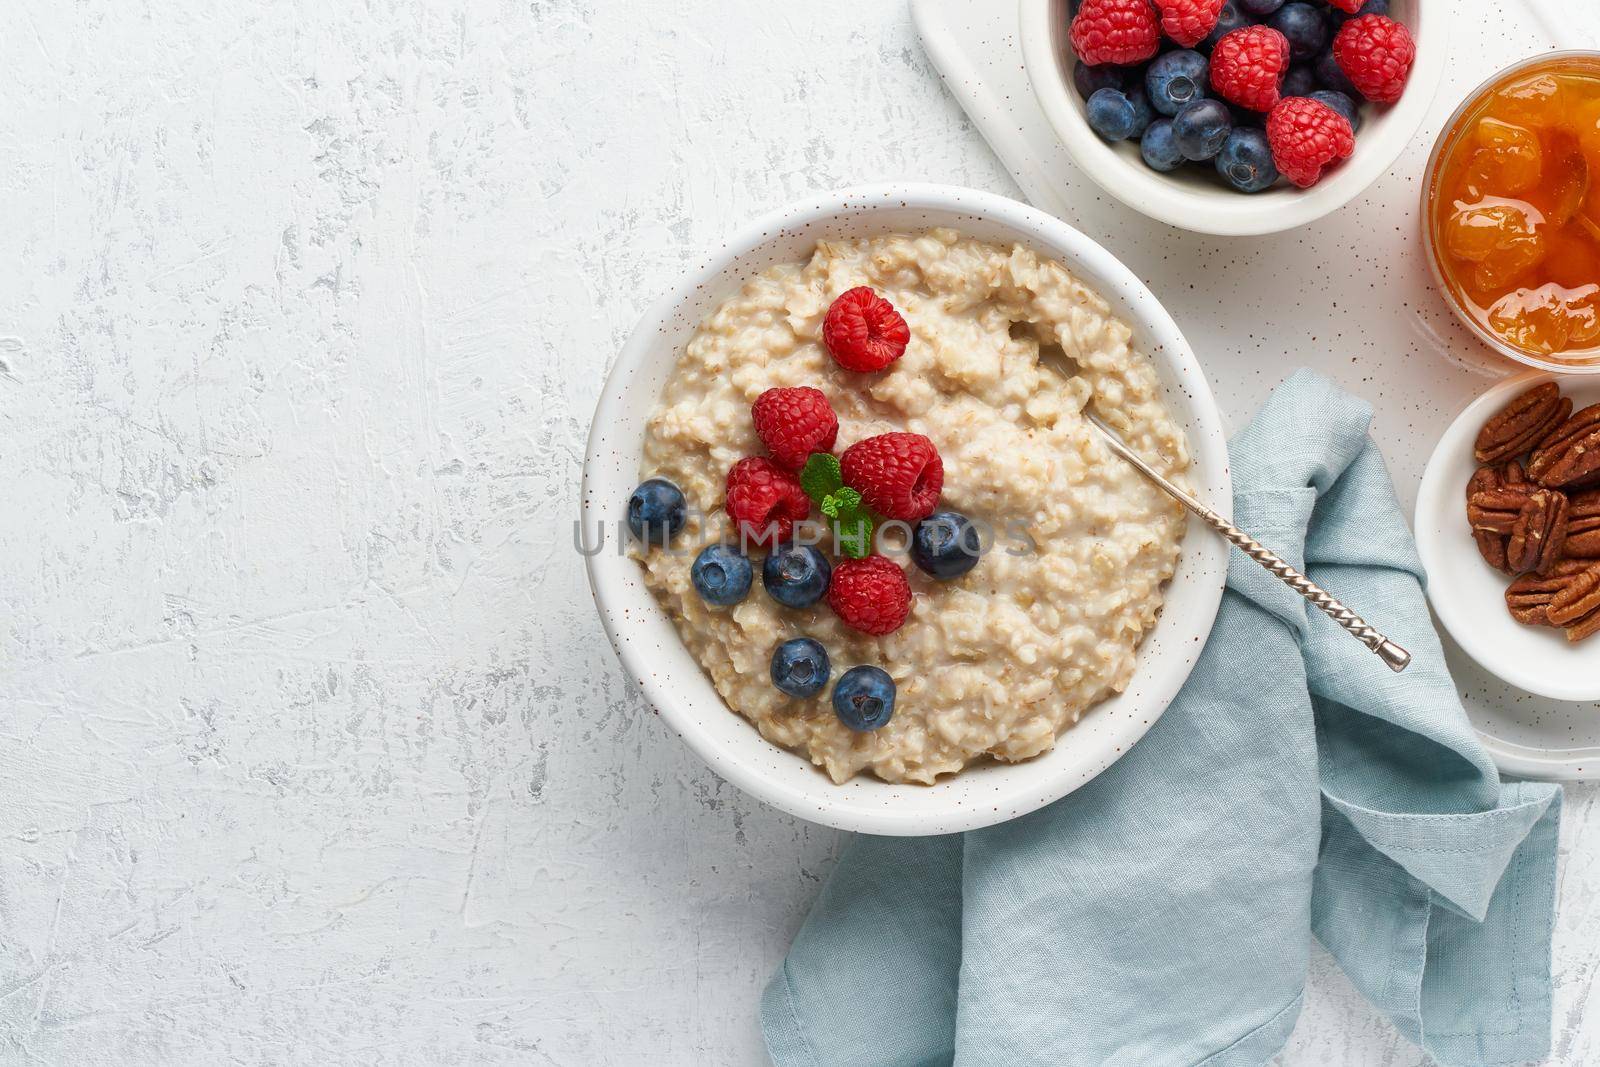 Oatmeal rustic porridge with blueberry, raspberries, jam and nuts in white bowl, dash diet with berries, white background, top view copy space. Healthy diet breakfast